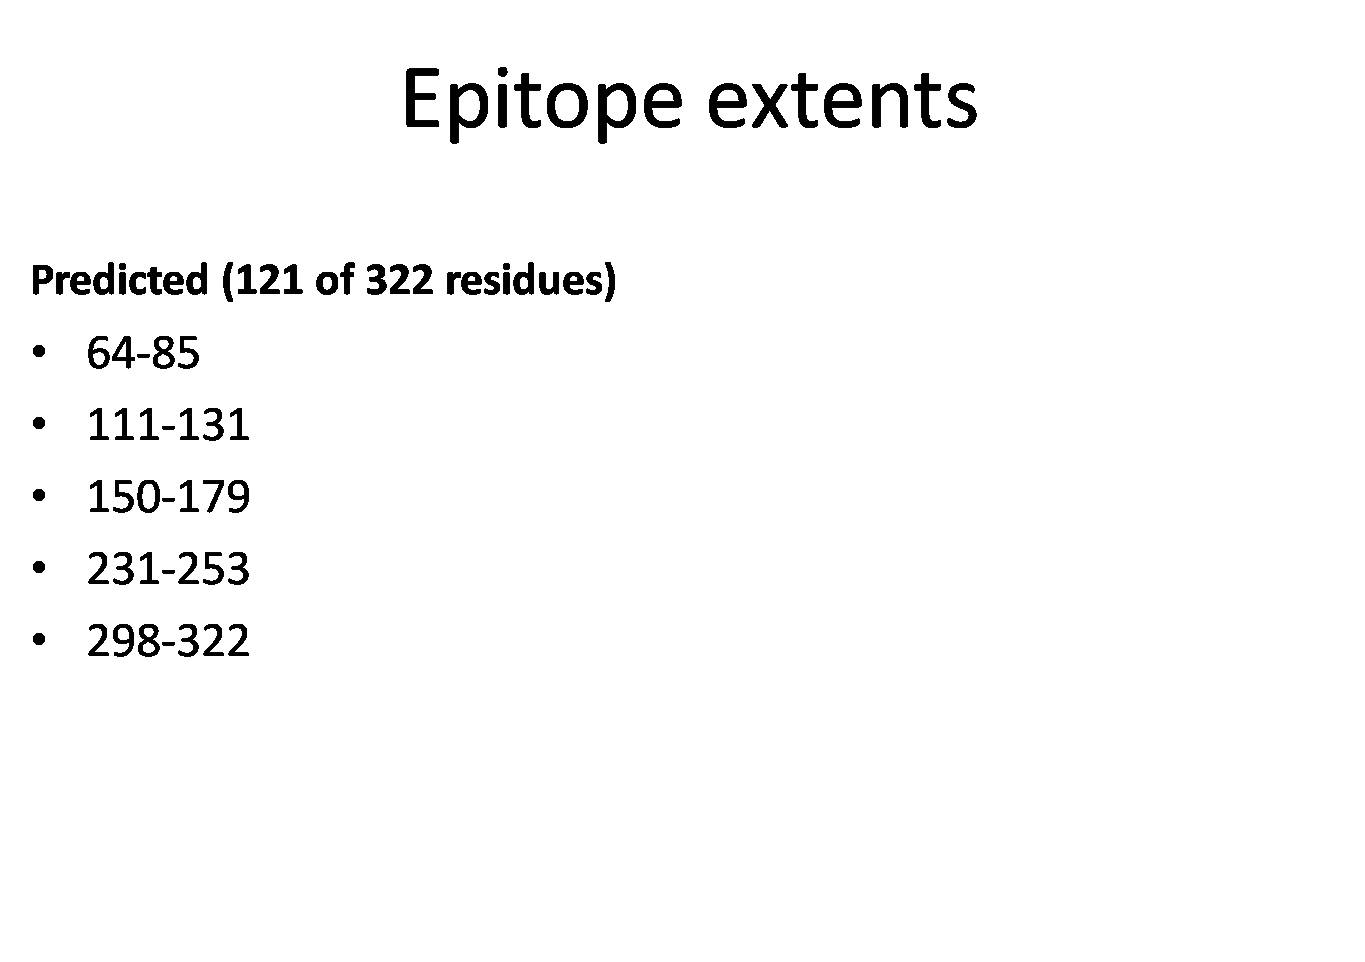 Predicted Epitope list